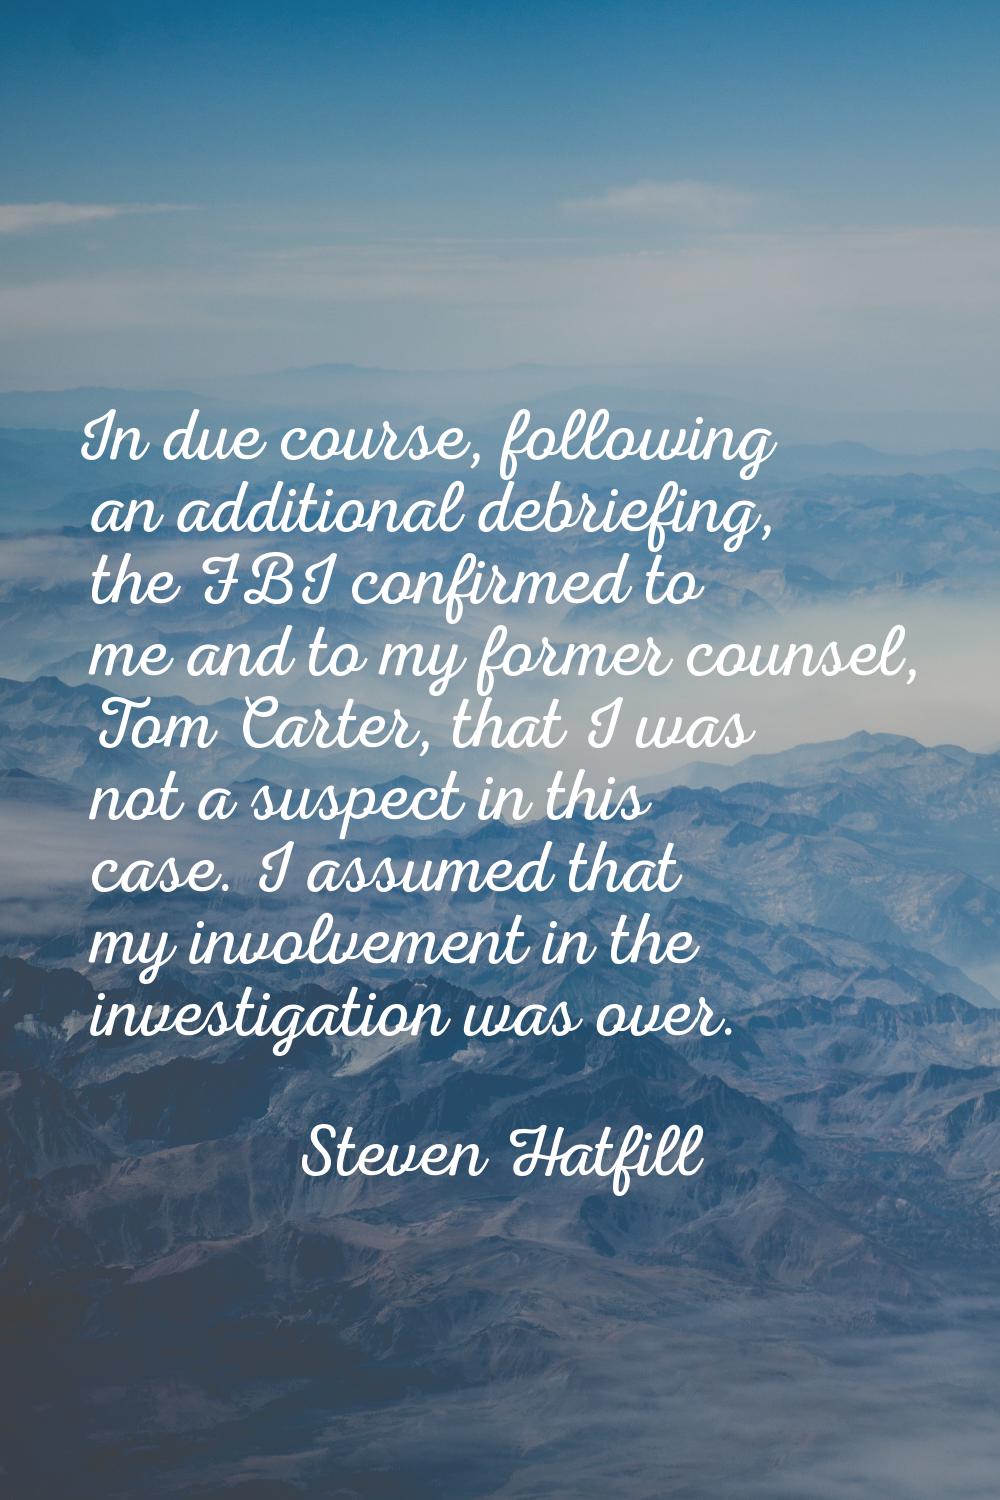 In due course, following an additional debriefing, the FBI confirmed to me and to my former counsel